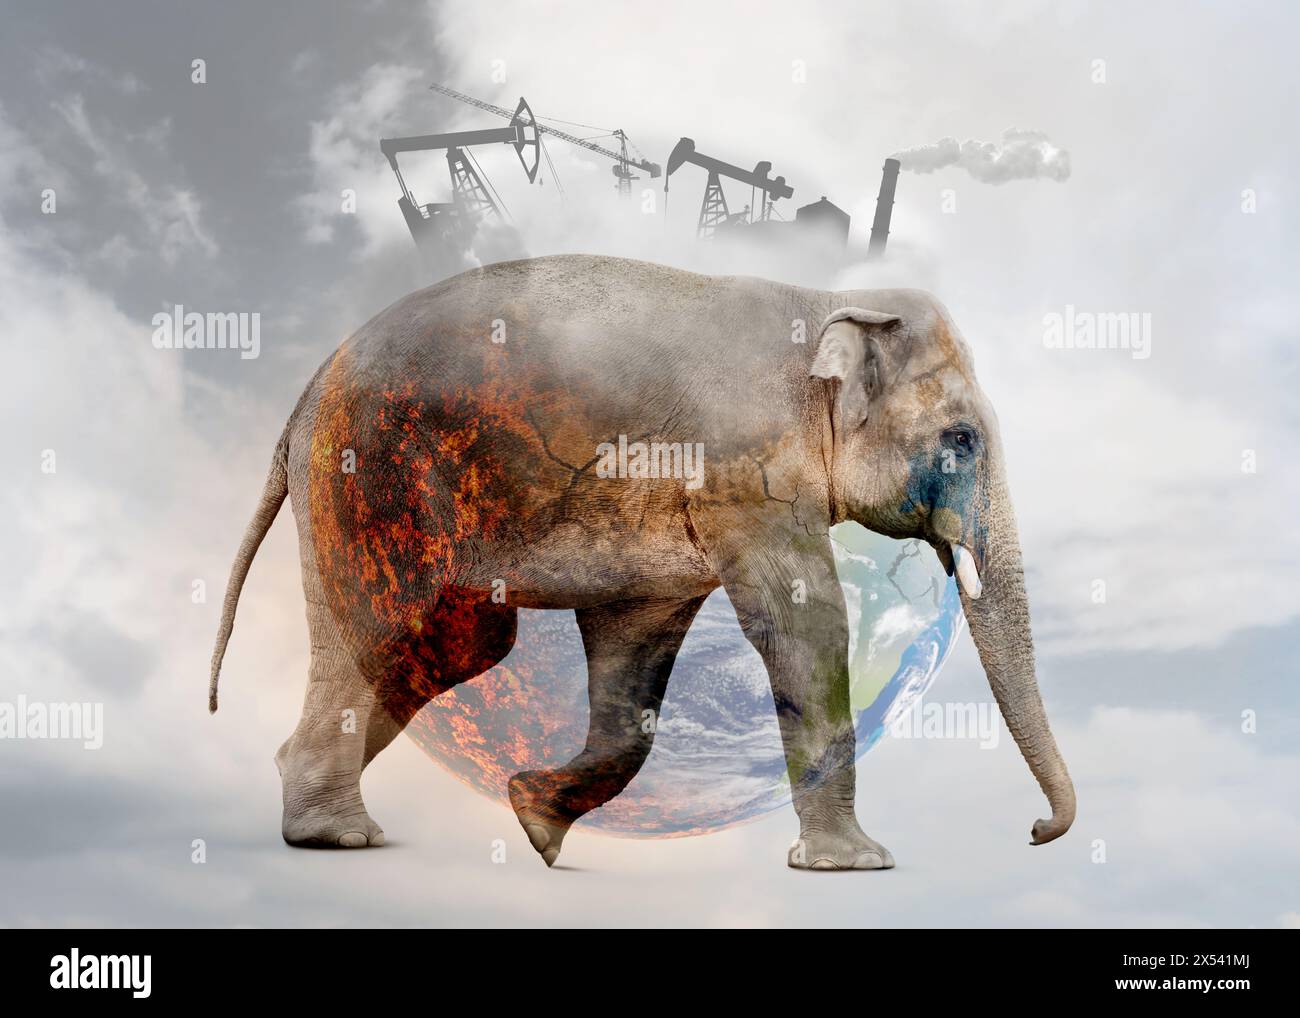 Double exposure of elephant and conceptual image depicting Earth destroying by global warming and industrial pollution Stock Photo